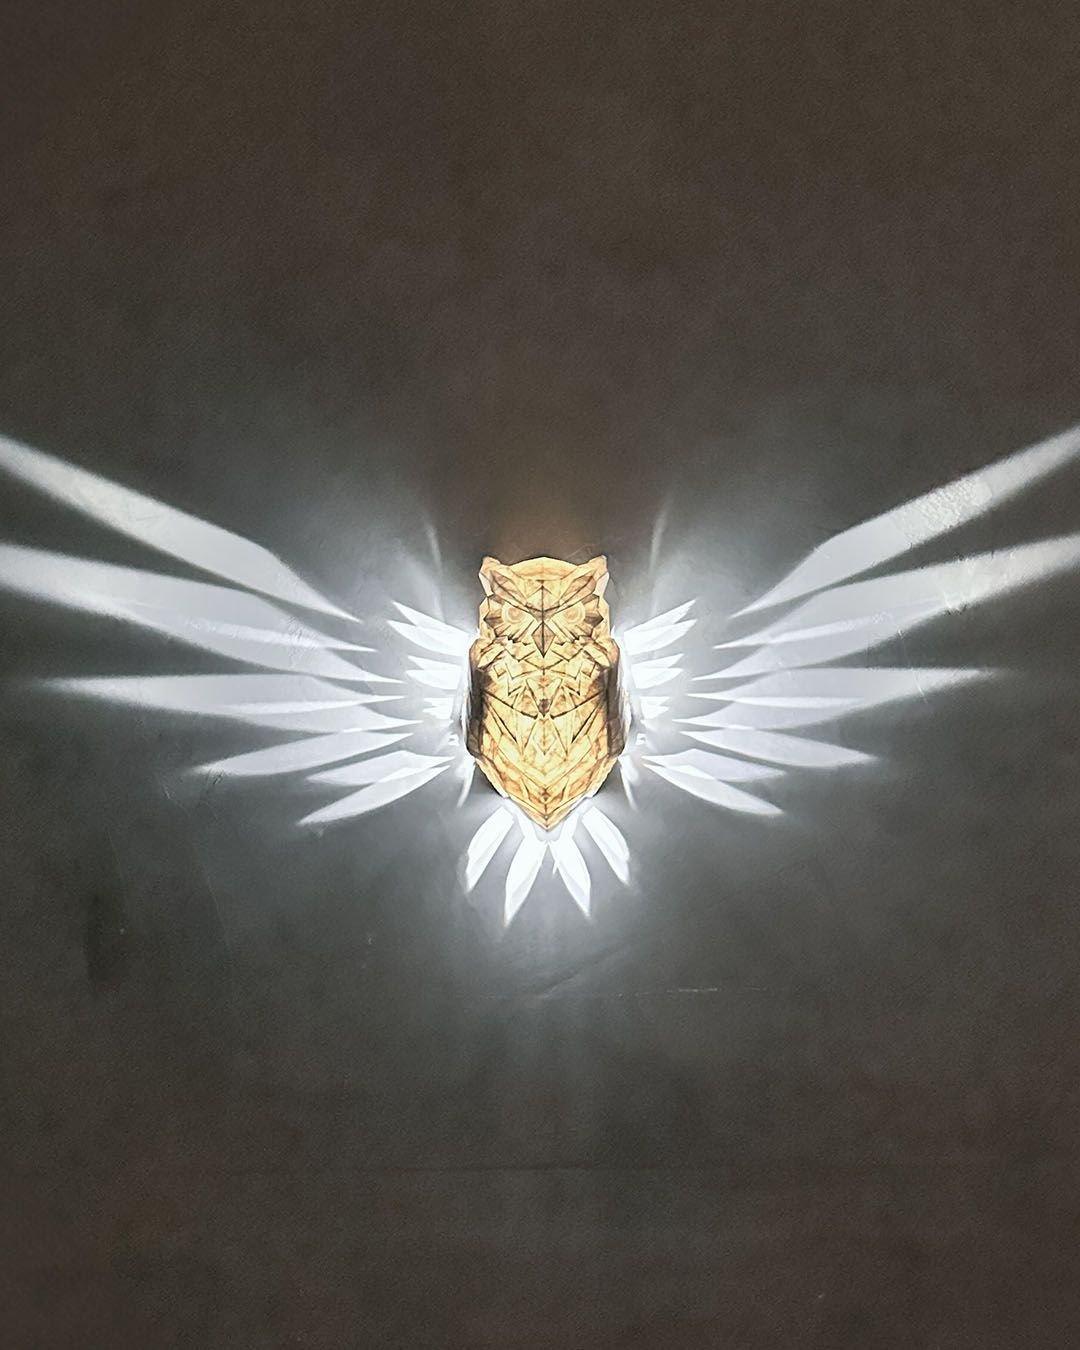 3D Printing Wall Mounted Projection Lamp - Owls - CozyBuys